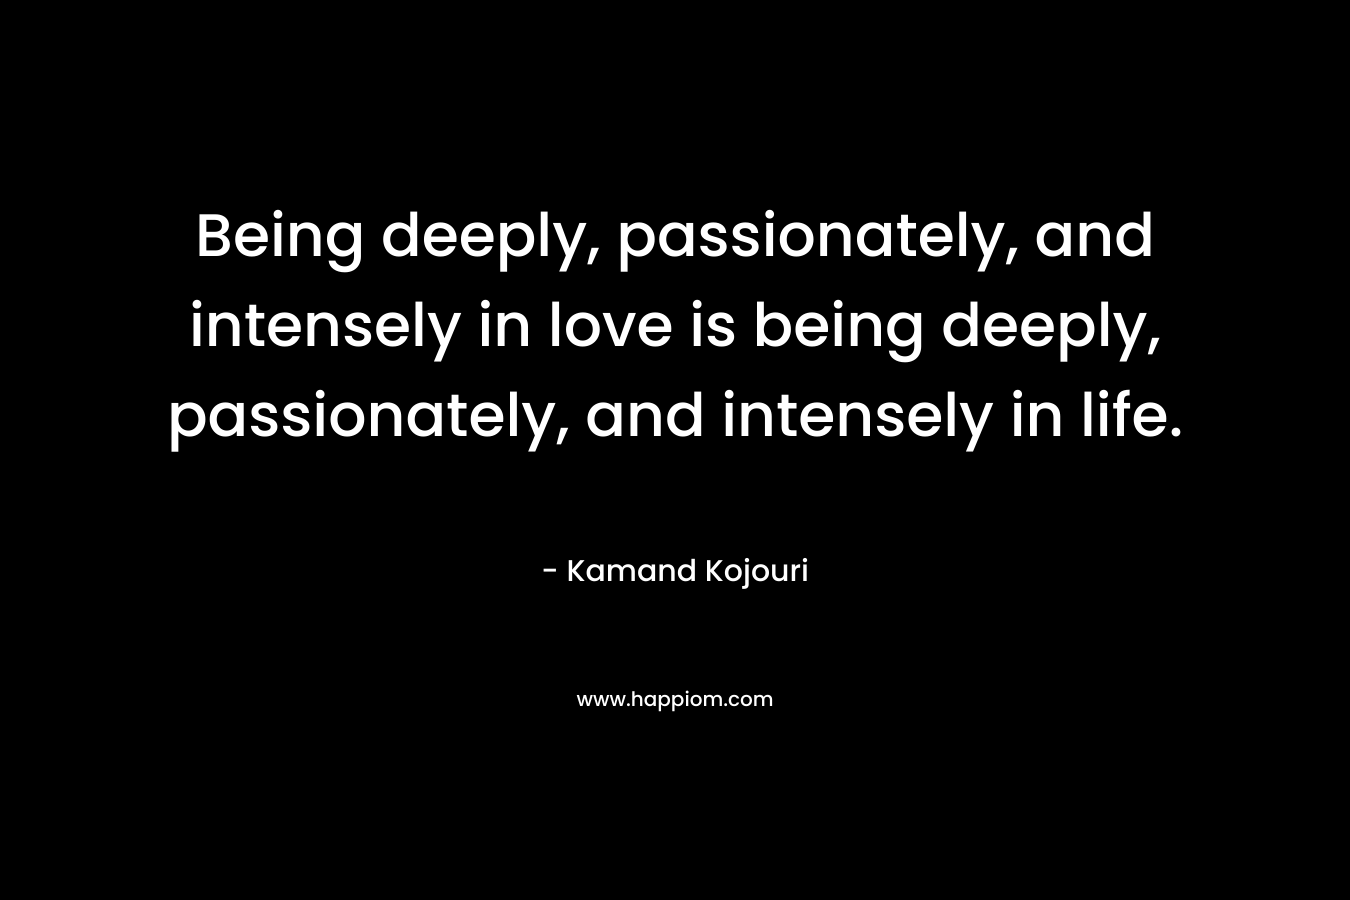 Being deeply, passionately, and intensely in love is being deeply, passionately, and intensely in life.